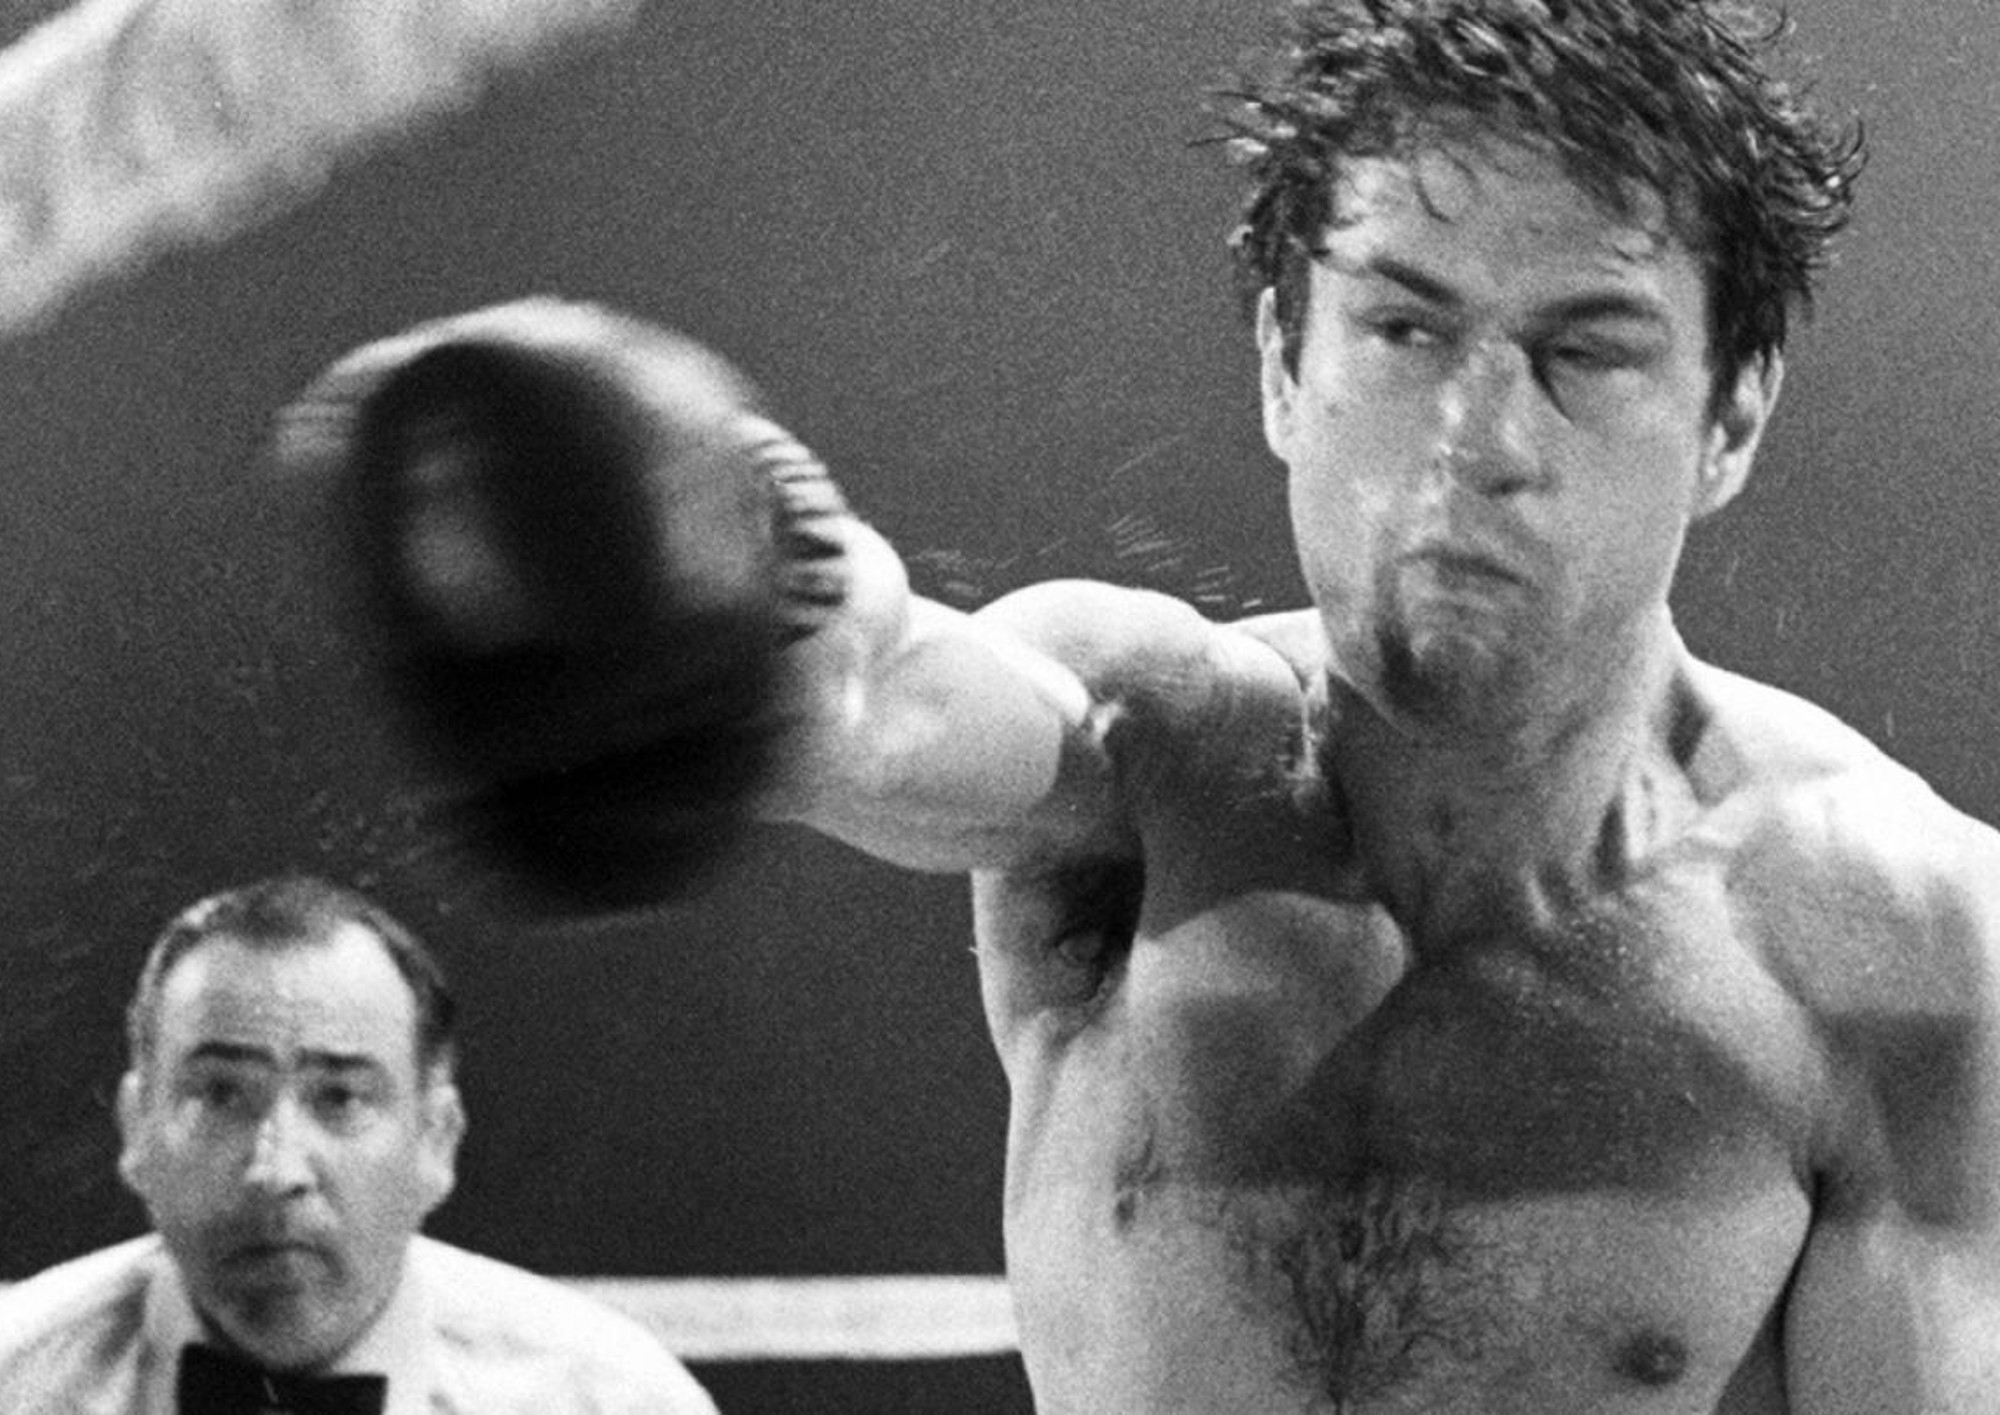 Image from the motion picture Raging Bull